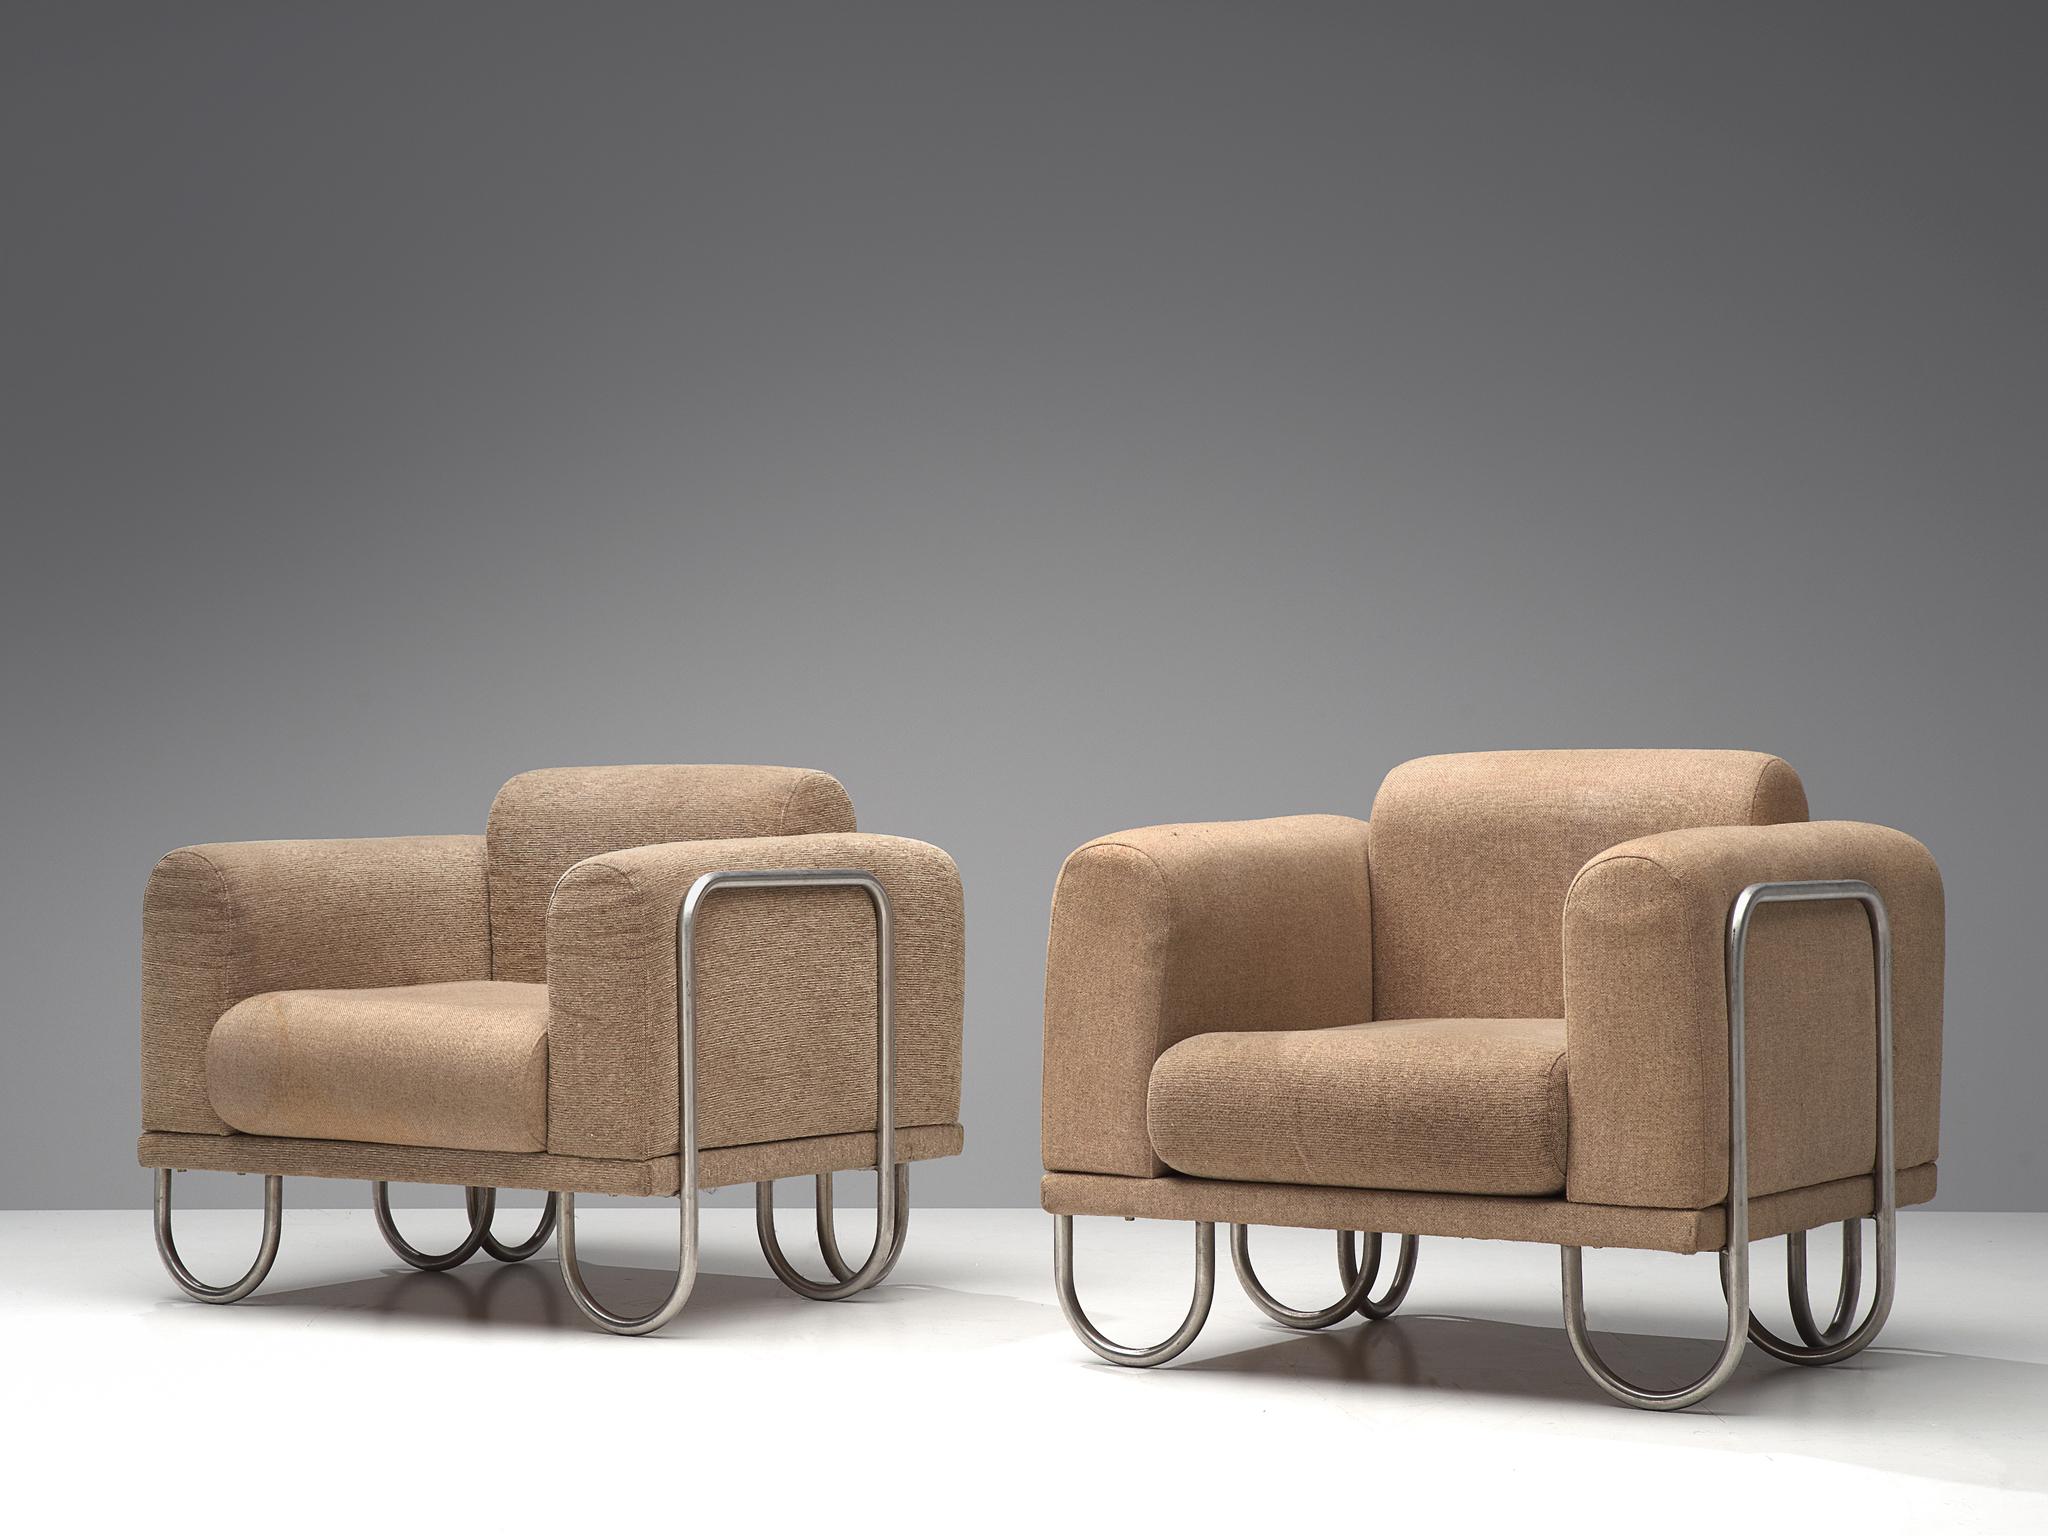 Pair of French club chairs, fabric and metal, France, 1970s

A comfortable easy chair that features a curved, chromed tubular frame. The frame appears to be an ongoing curved line, moving upwards to support the cushions and downwards, functioning as